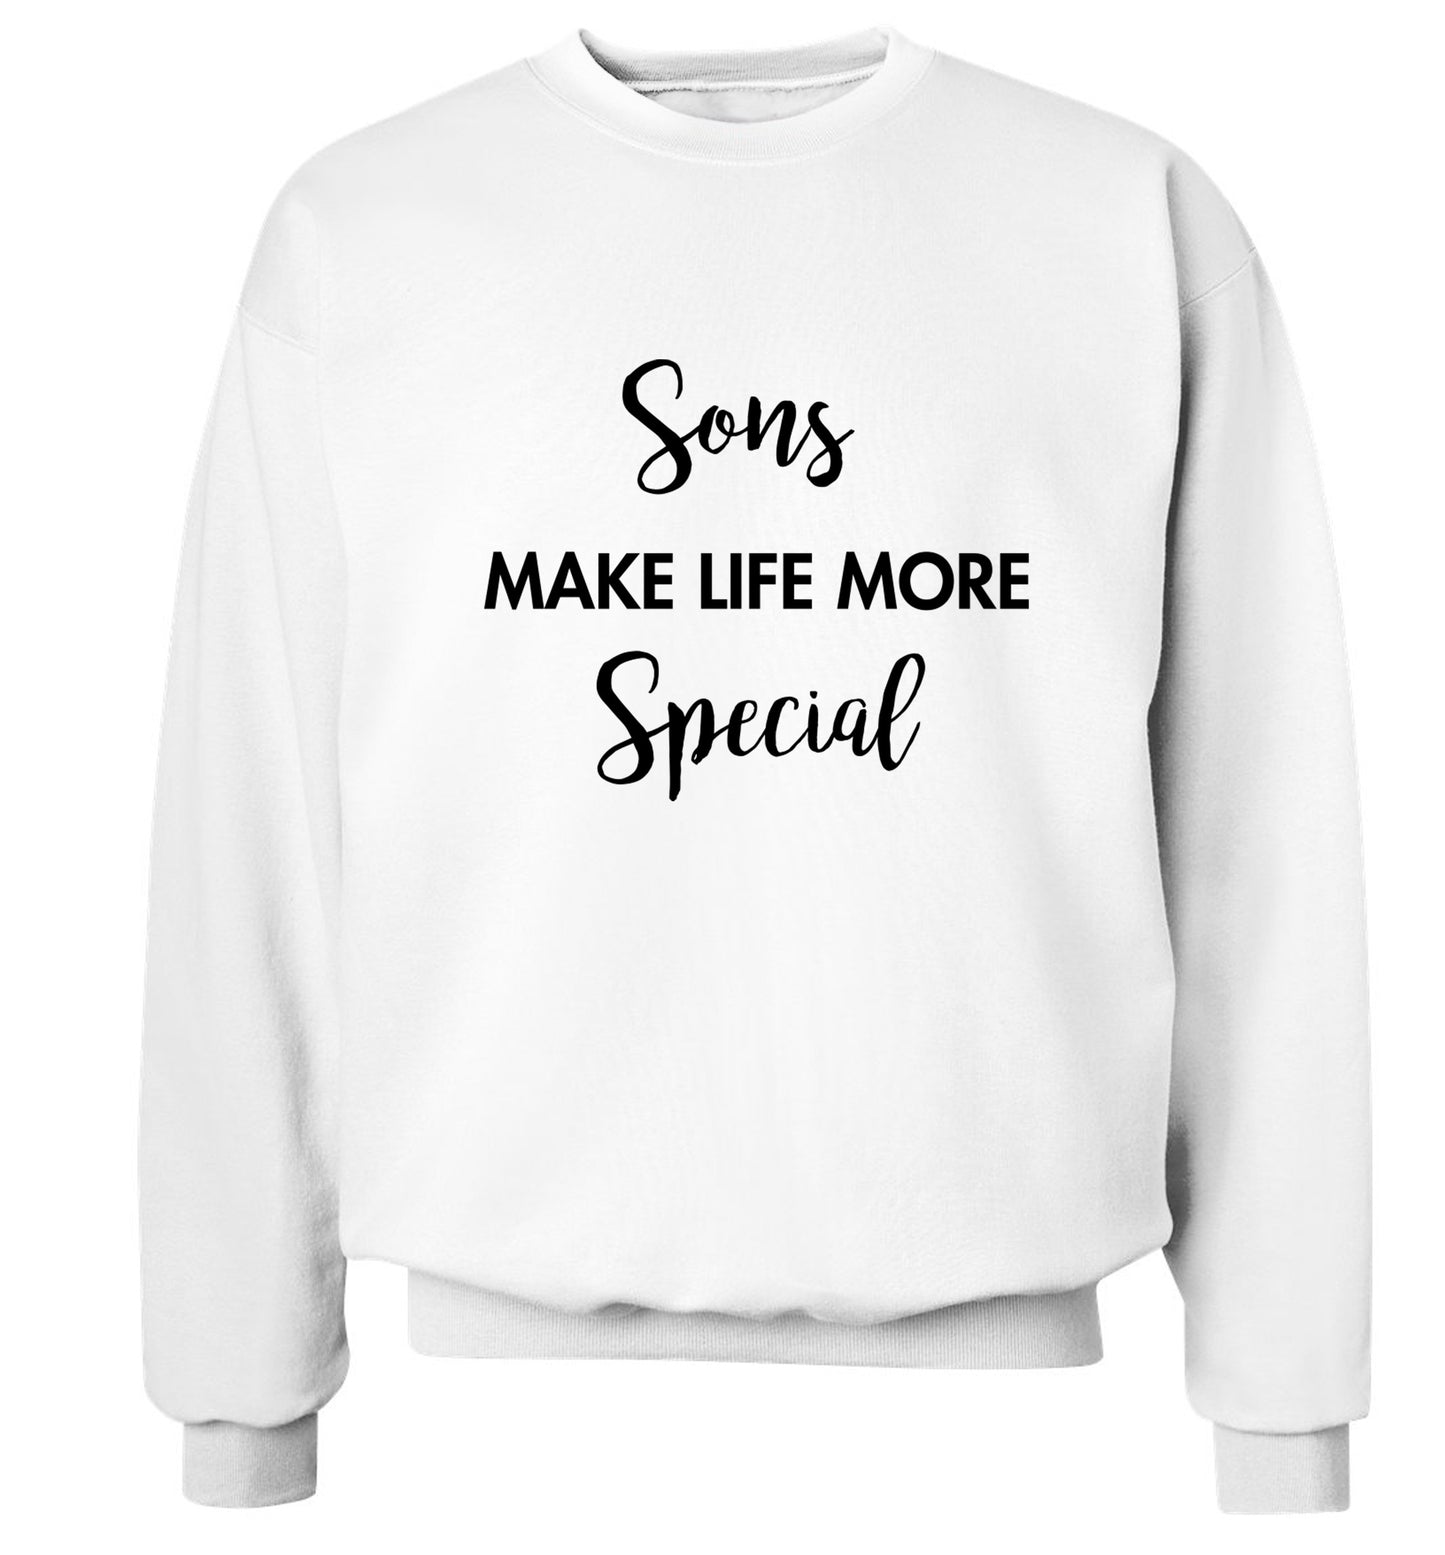 Daughters make life more special Adult's unisex white Sweater 2XL